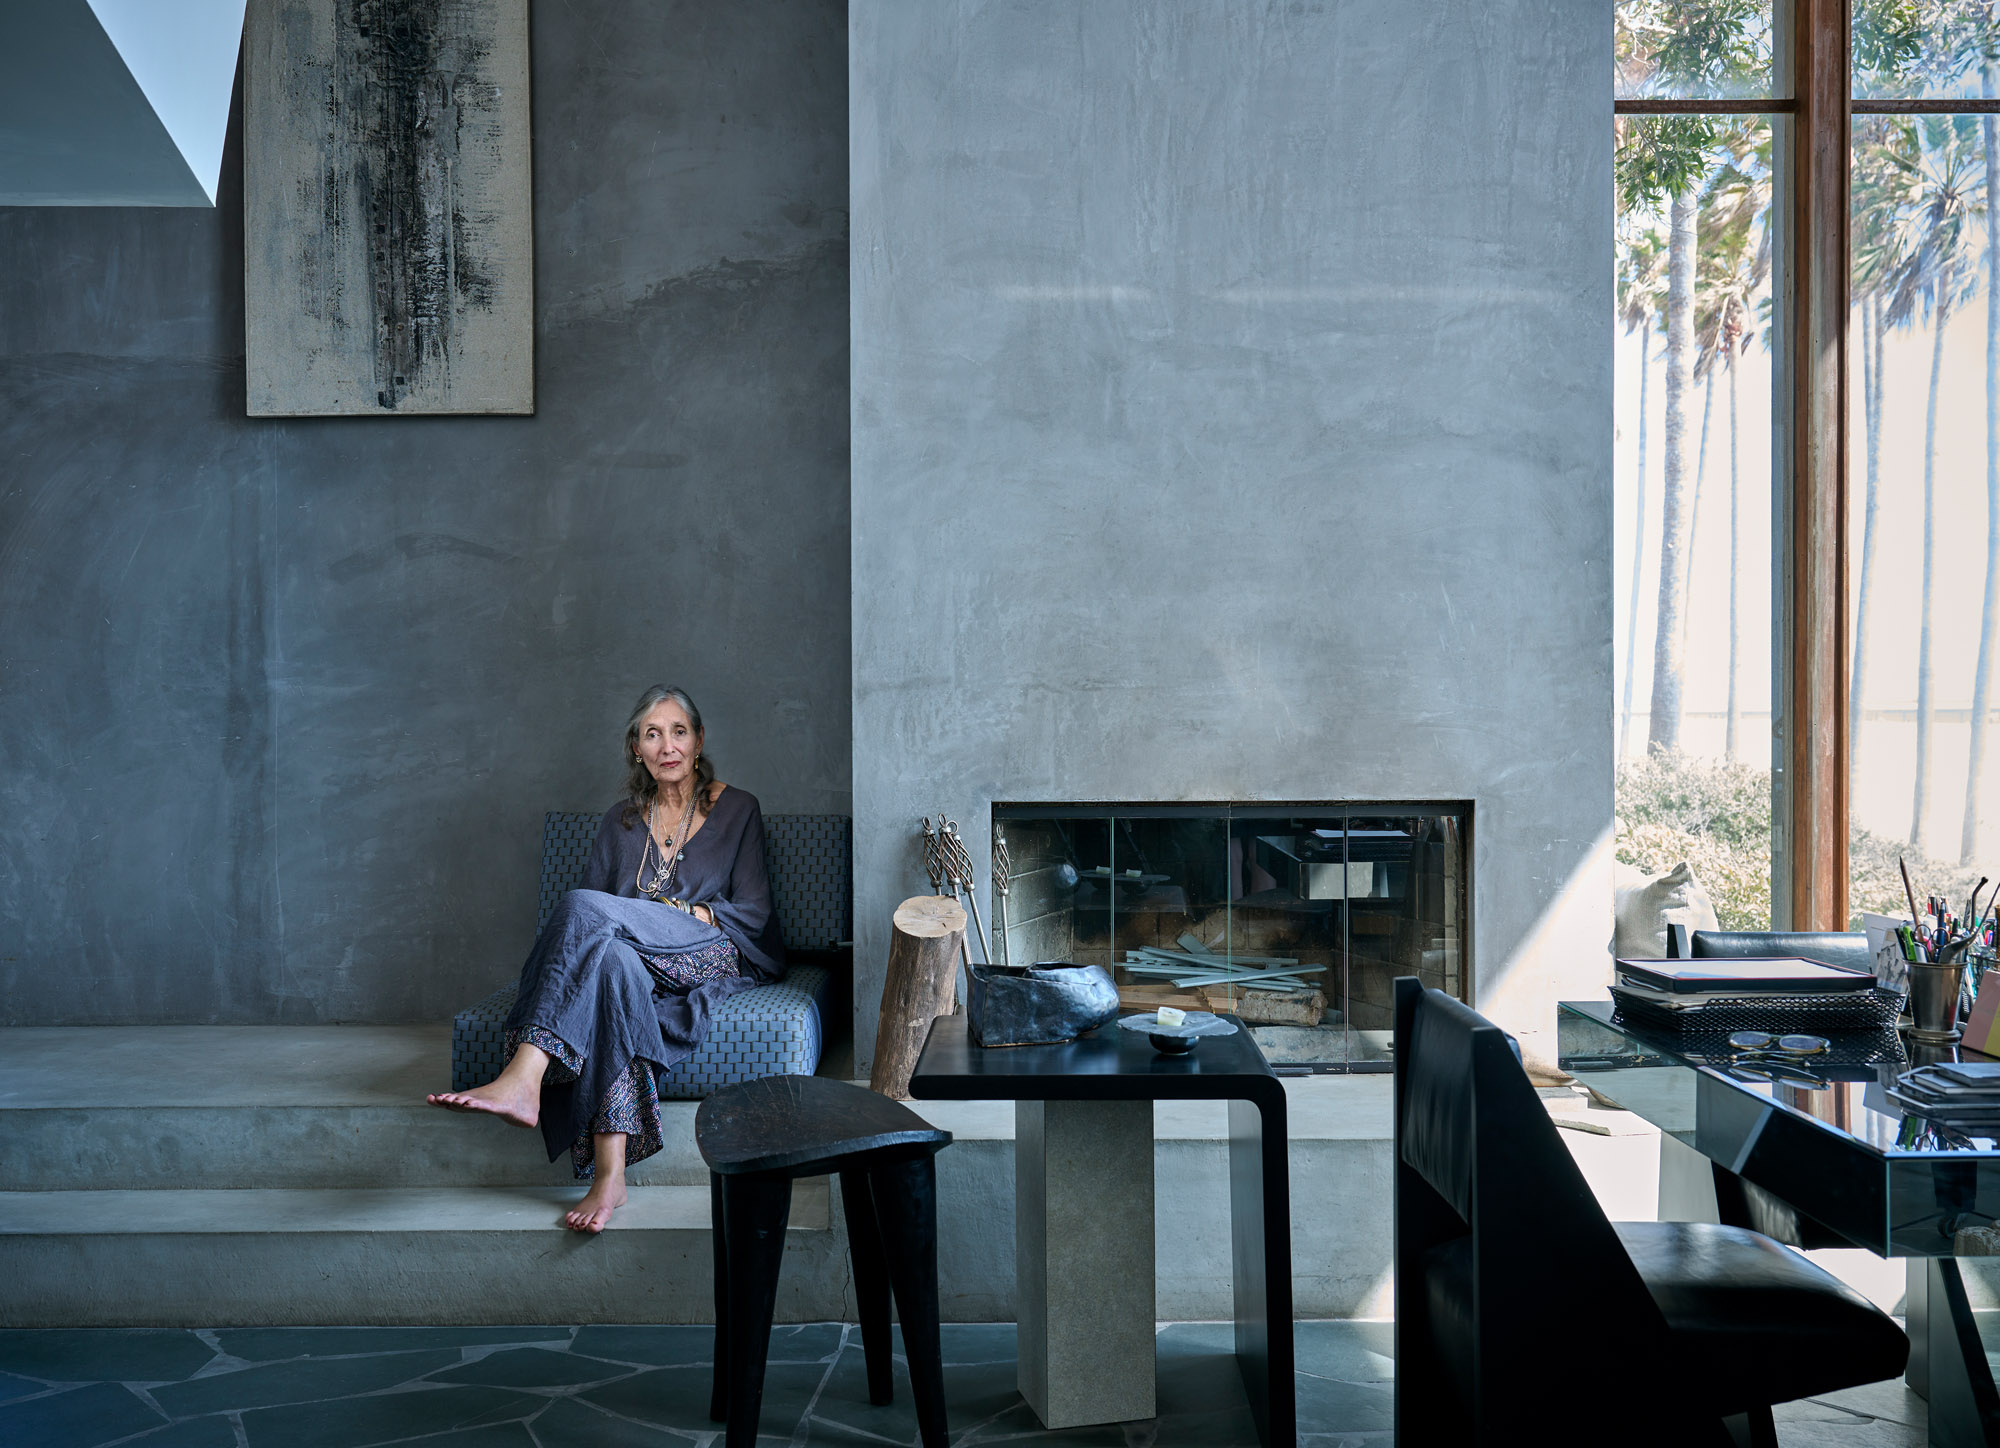 Lenny Steinberg and her Venice Beach home: watch the film